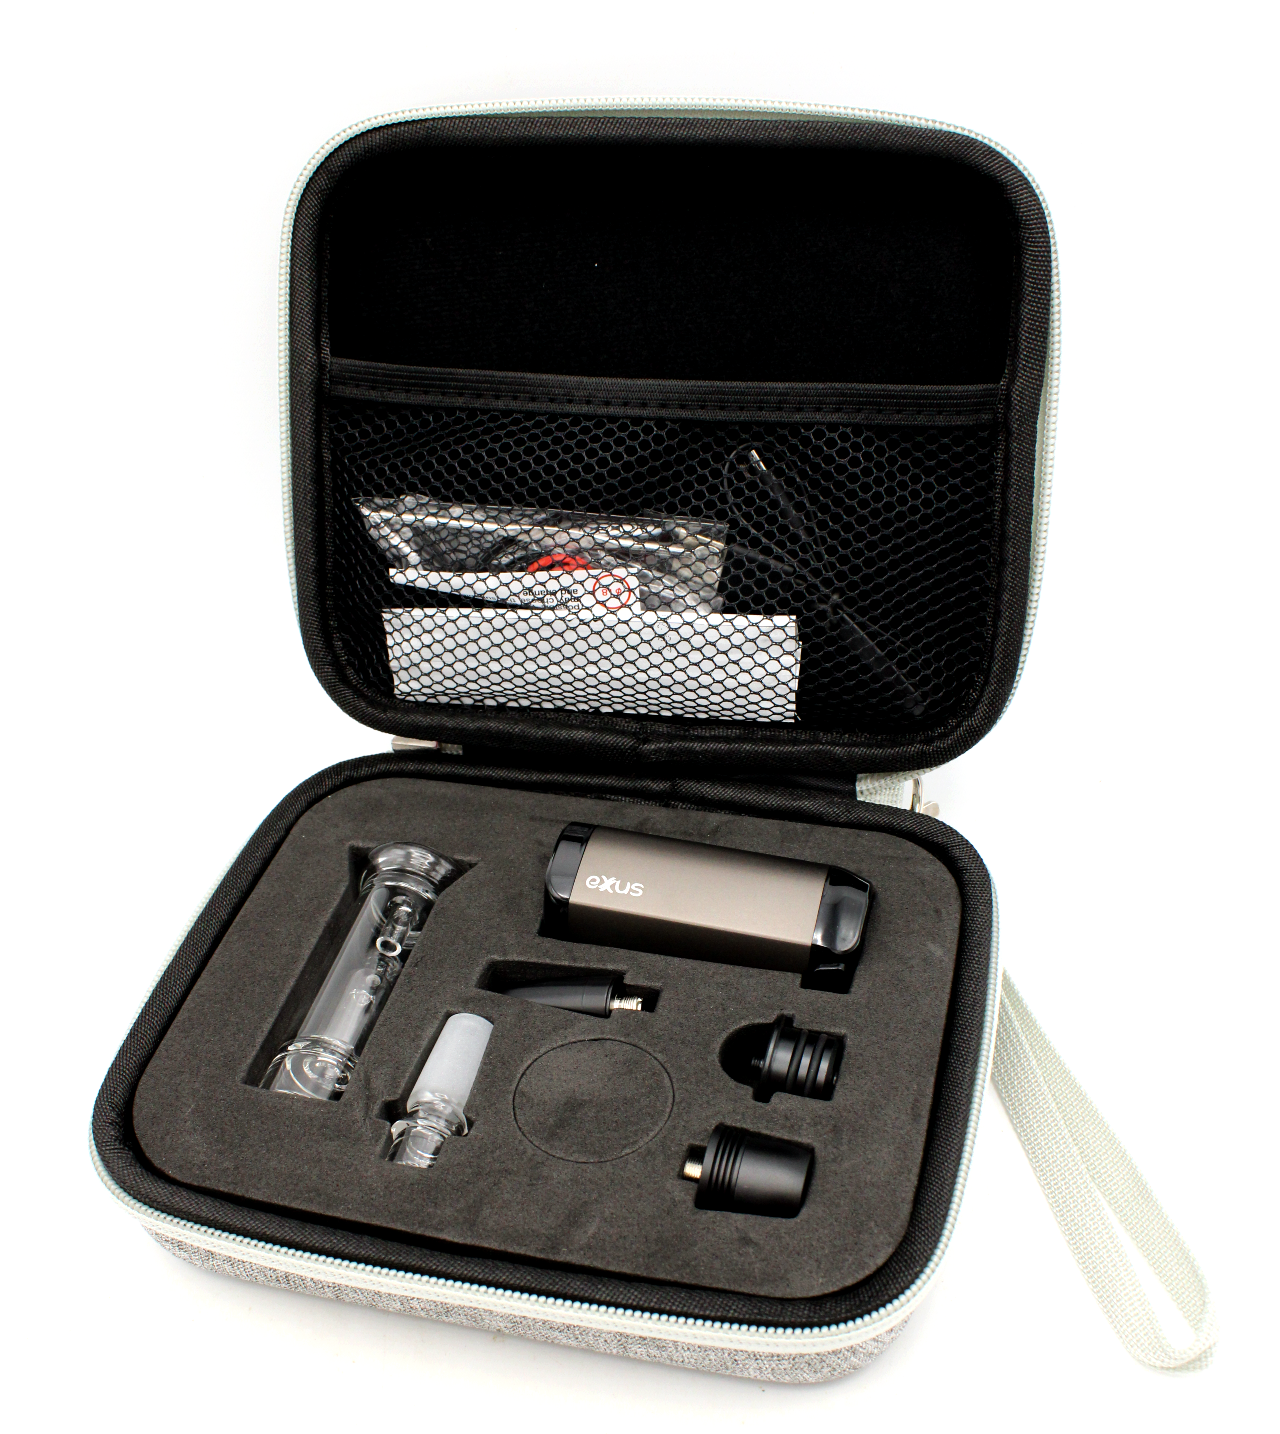 EXXUS VRS 3-IN-1 CONCENTRATE VAPE KIT